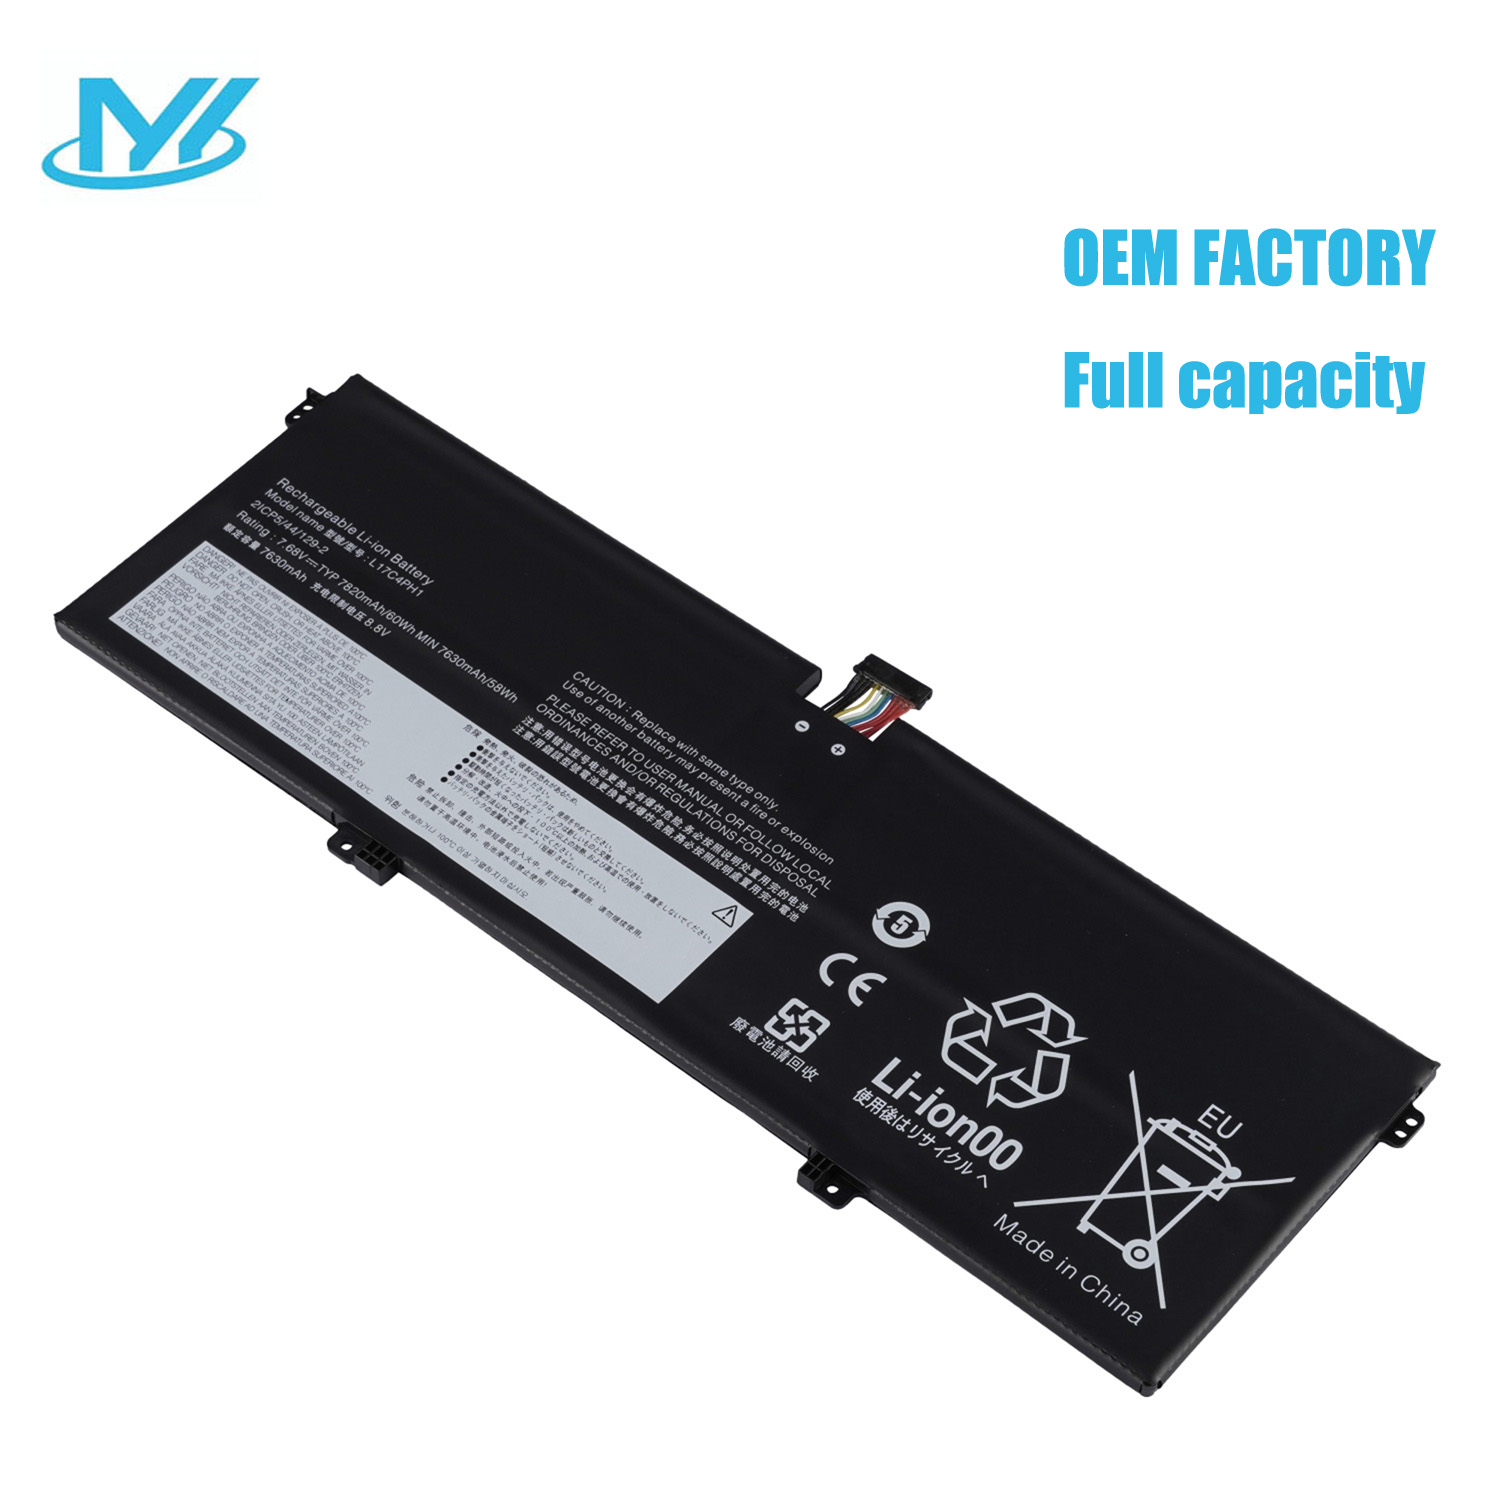 L17C4PH1 rechargeable lithium ion Notebook battery Laptop battery For Lenovo Yoga C930-13IKB Glass (Type 81EQ) 7.68V 60Wh 7820mAh